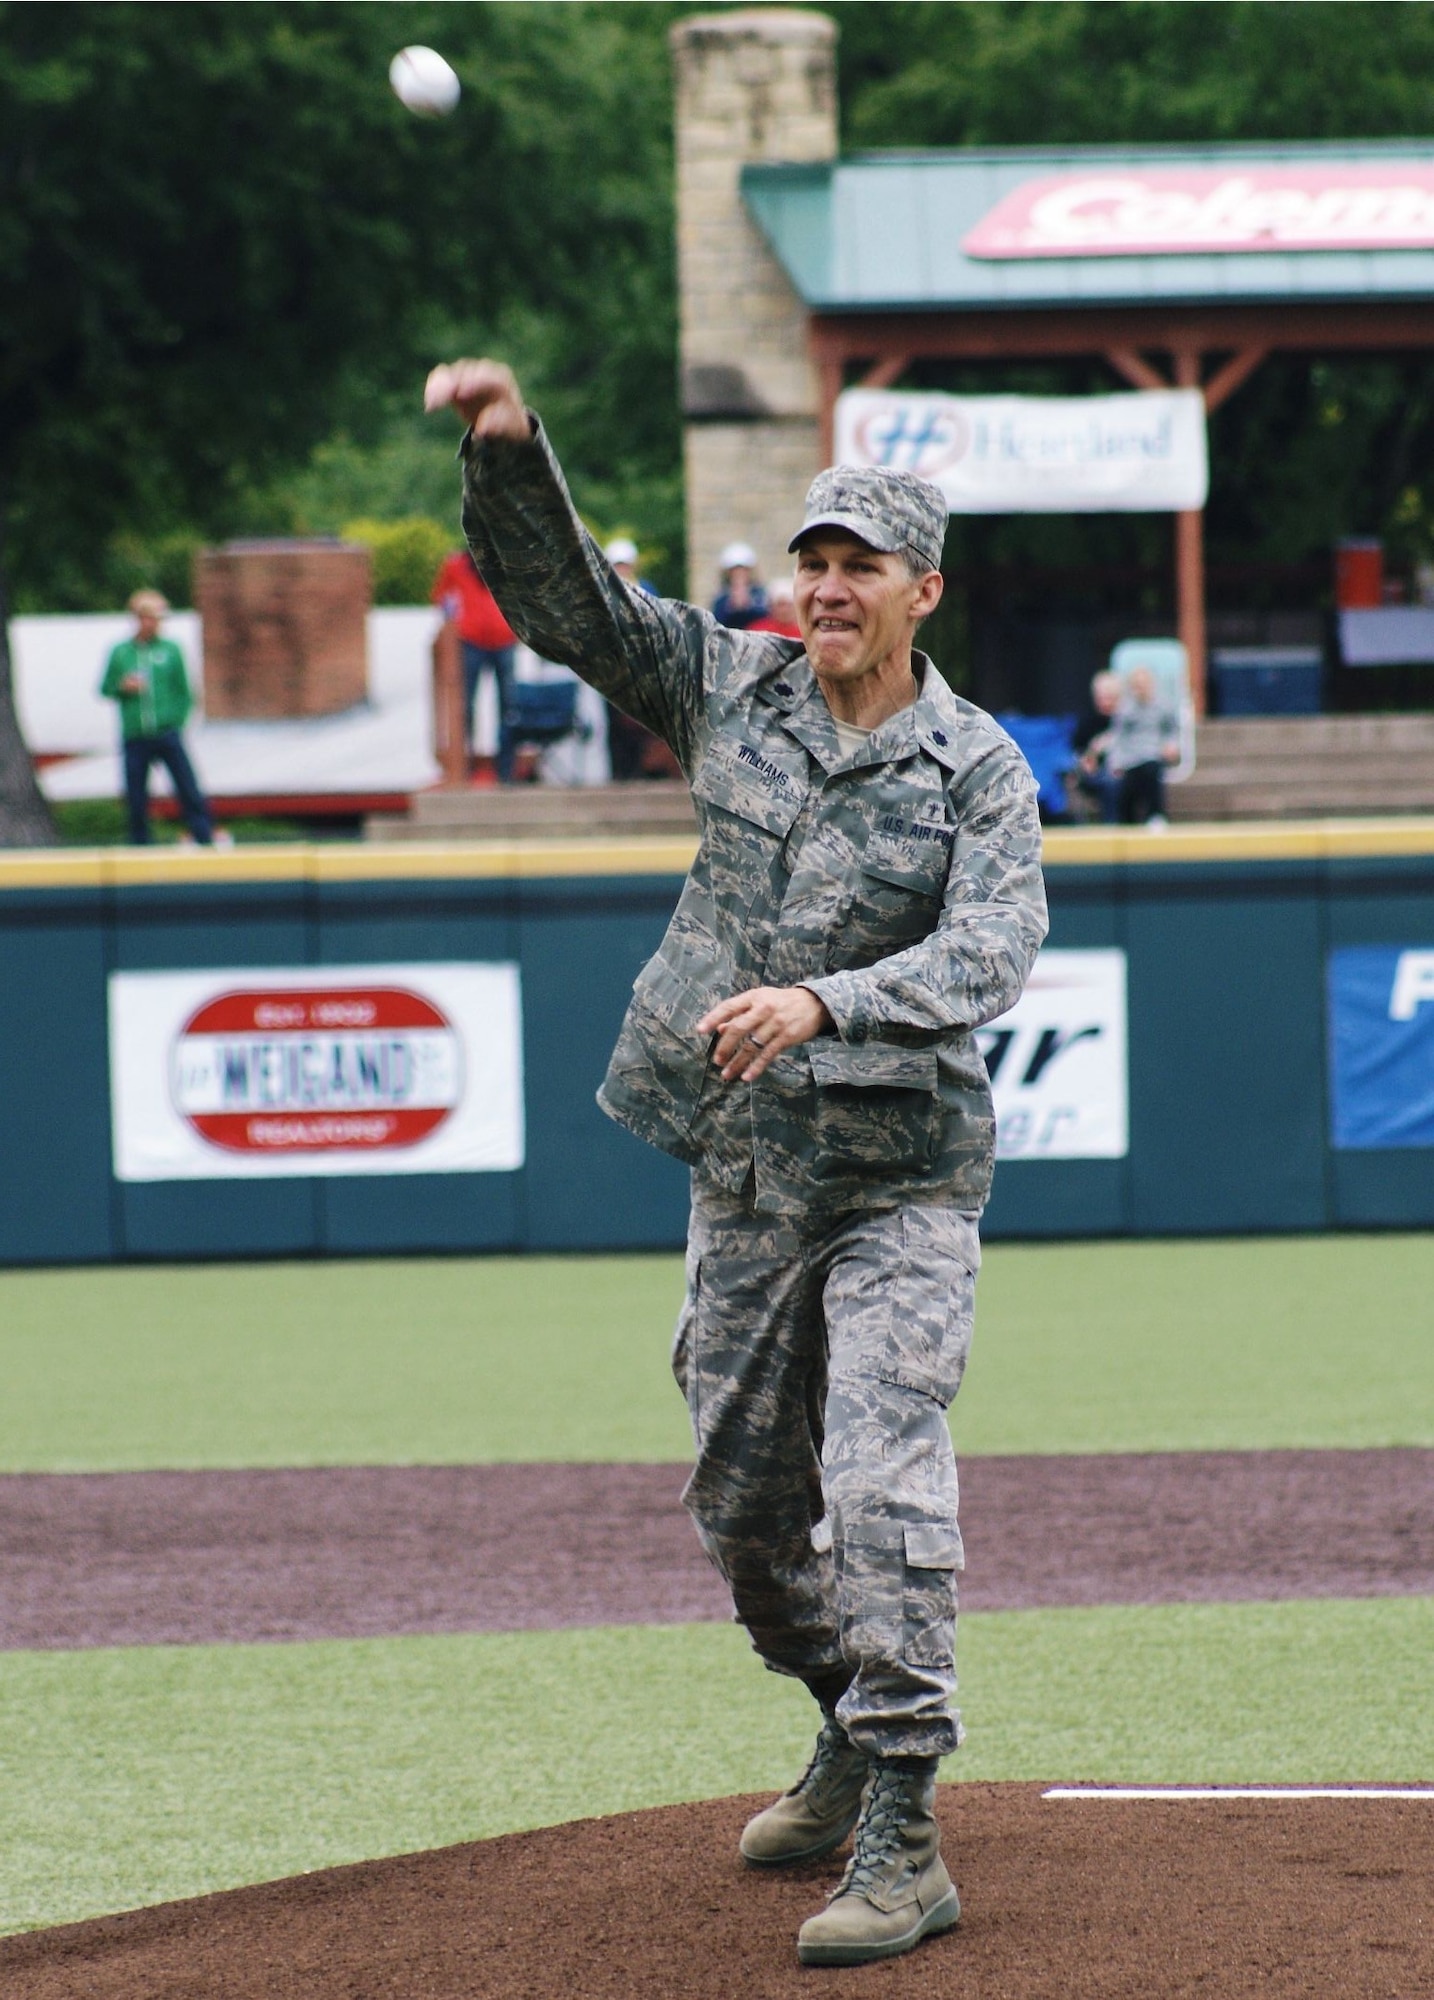 The 184th Intelligence Wing was out in force at the WSU Baseball's Military
Appreciation Day ballgame on May 15th.  

After the posting of the colors 184th Head Chaplain and former WSU football
player, Lt Col Terry Williams, walked out to the pitcher's mound to throw
the ceremonial  "First Pitch".  While walking to the mound the announcer
shared Chaplain Williams' military and WSU biographies with the crowd.
Chaplain Williams graduated WSU in 1981 with a Bachelors Degree in Business.
He played football for the Shockers from 1977 to 1980 under Coach Willie
Jeffries as a free safety and was Co-Captain for the 1980 team. He was
awarded "Honorable Mention All-Missouri Valley" in 1980. The crowd showed
their respect by clapping and standing during the reading of his military
biography, but when they heard that Chaplain Williams was a former WSU
football player all 3,625 erupted in cheers. 

After the applause died down, the announcer told Chaplain Williams to, "show
us what you got". Good thing he was throwing to Shocker star outfielder Ryan
Jones because Chaplain Williams put a little too much zip on the throw and
Jones had to get out of his catcher's position to flag down the ball. Jones
got the ball and reigned in successfully.  It made for a good ending to great
start of WSU Baseball's Military Appreciation Day.
